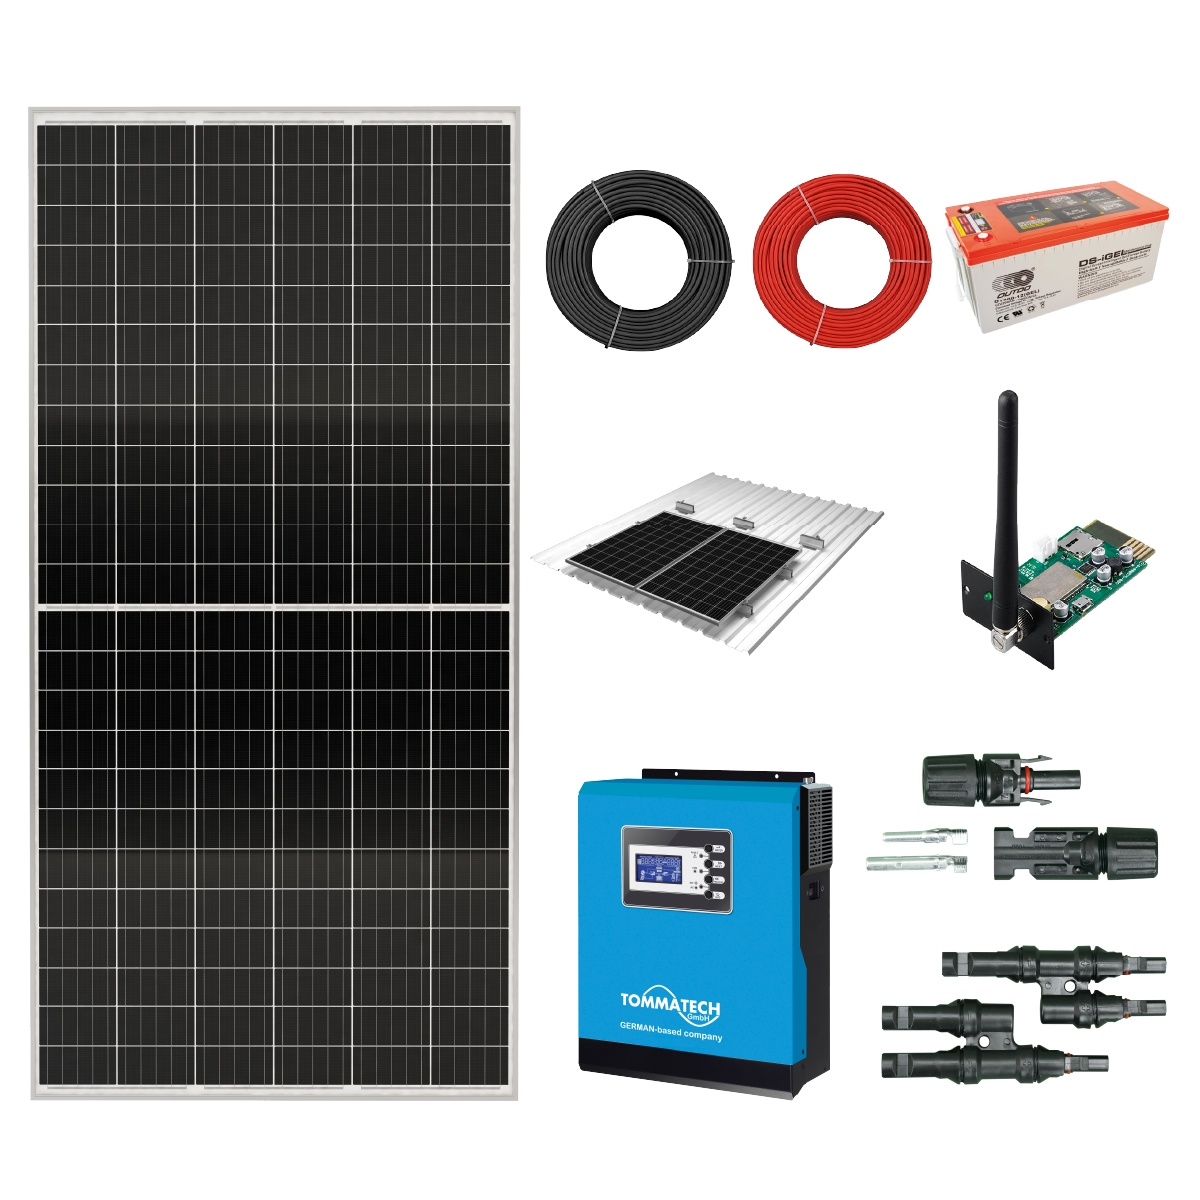 3kW / 910Wp / 9.6kWh / 1~ PWM Solar Off-Grid Solution